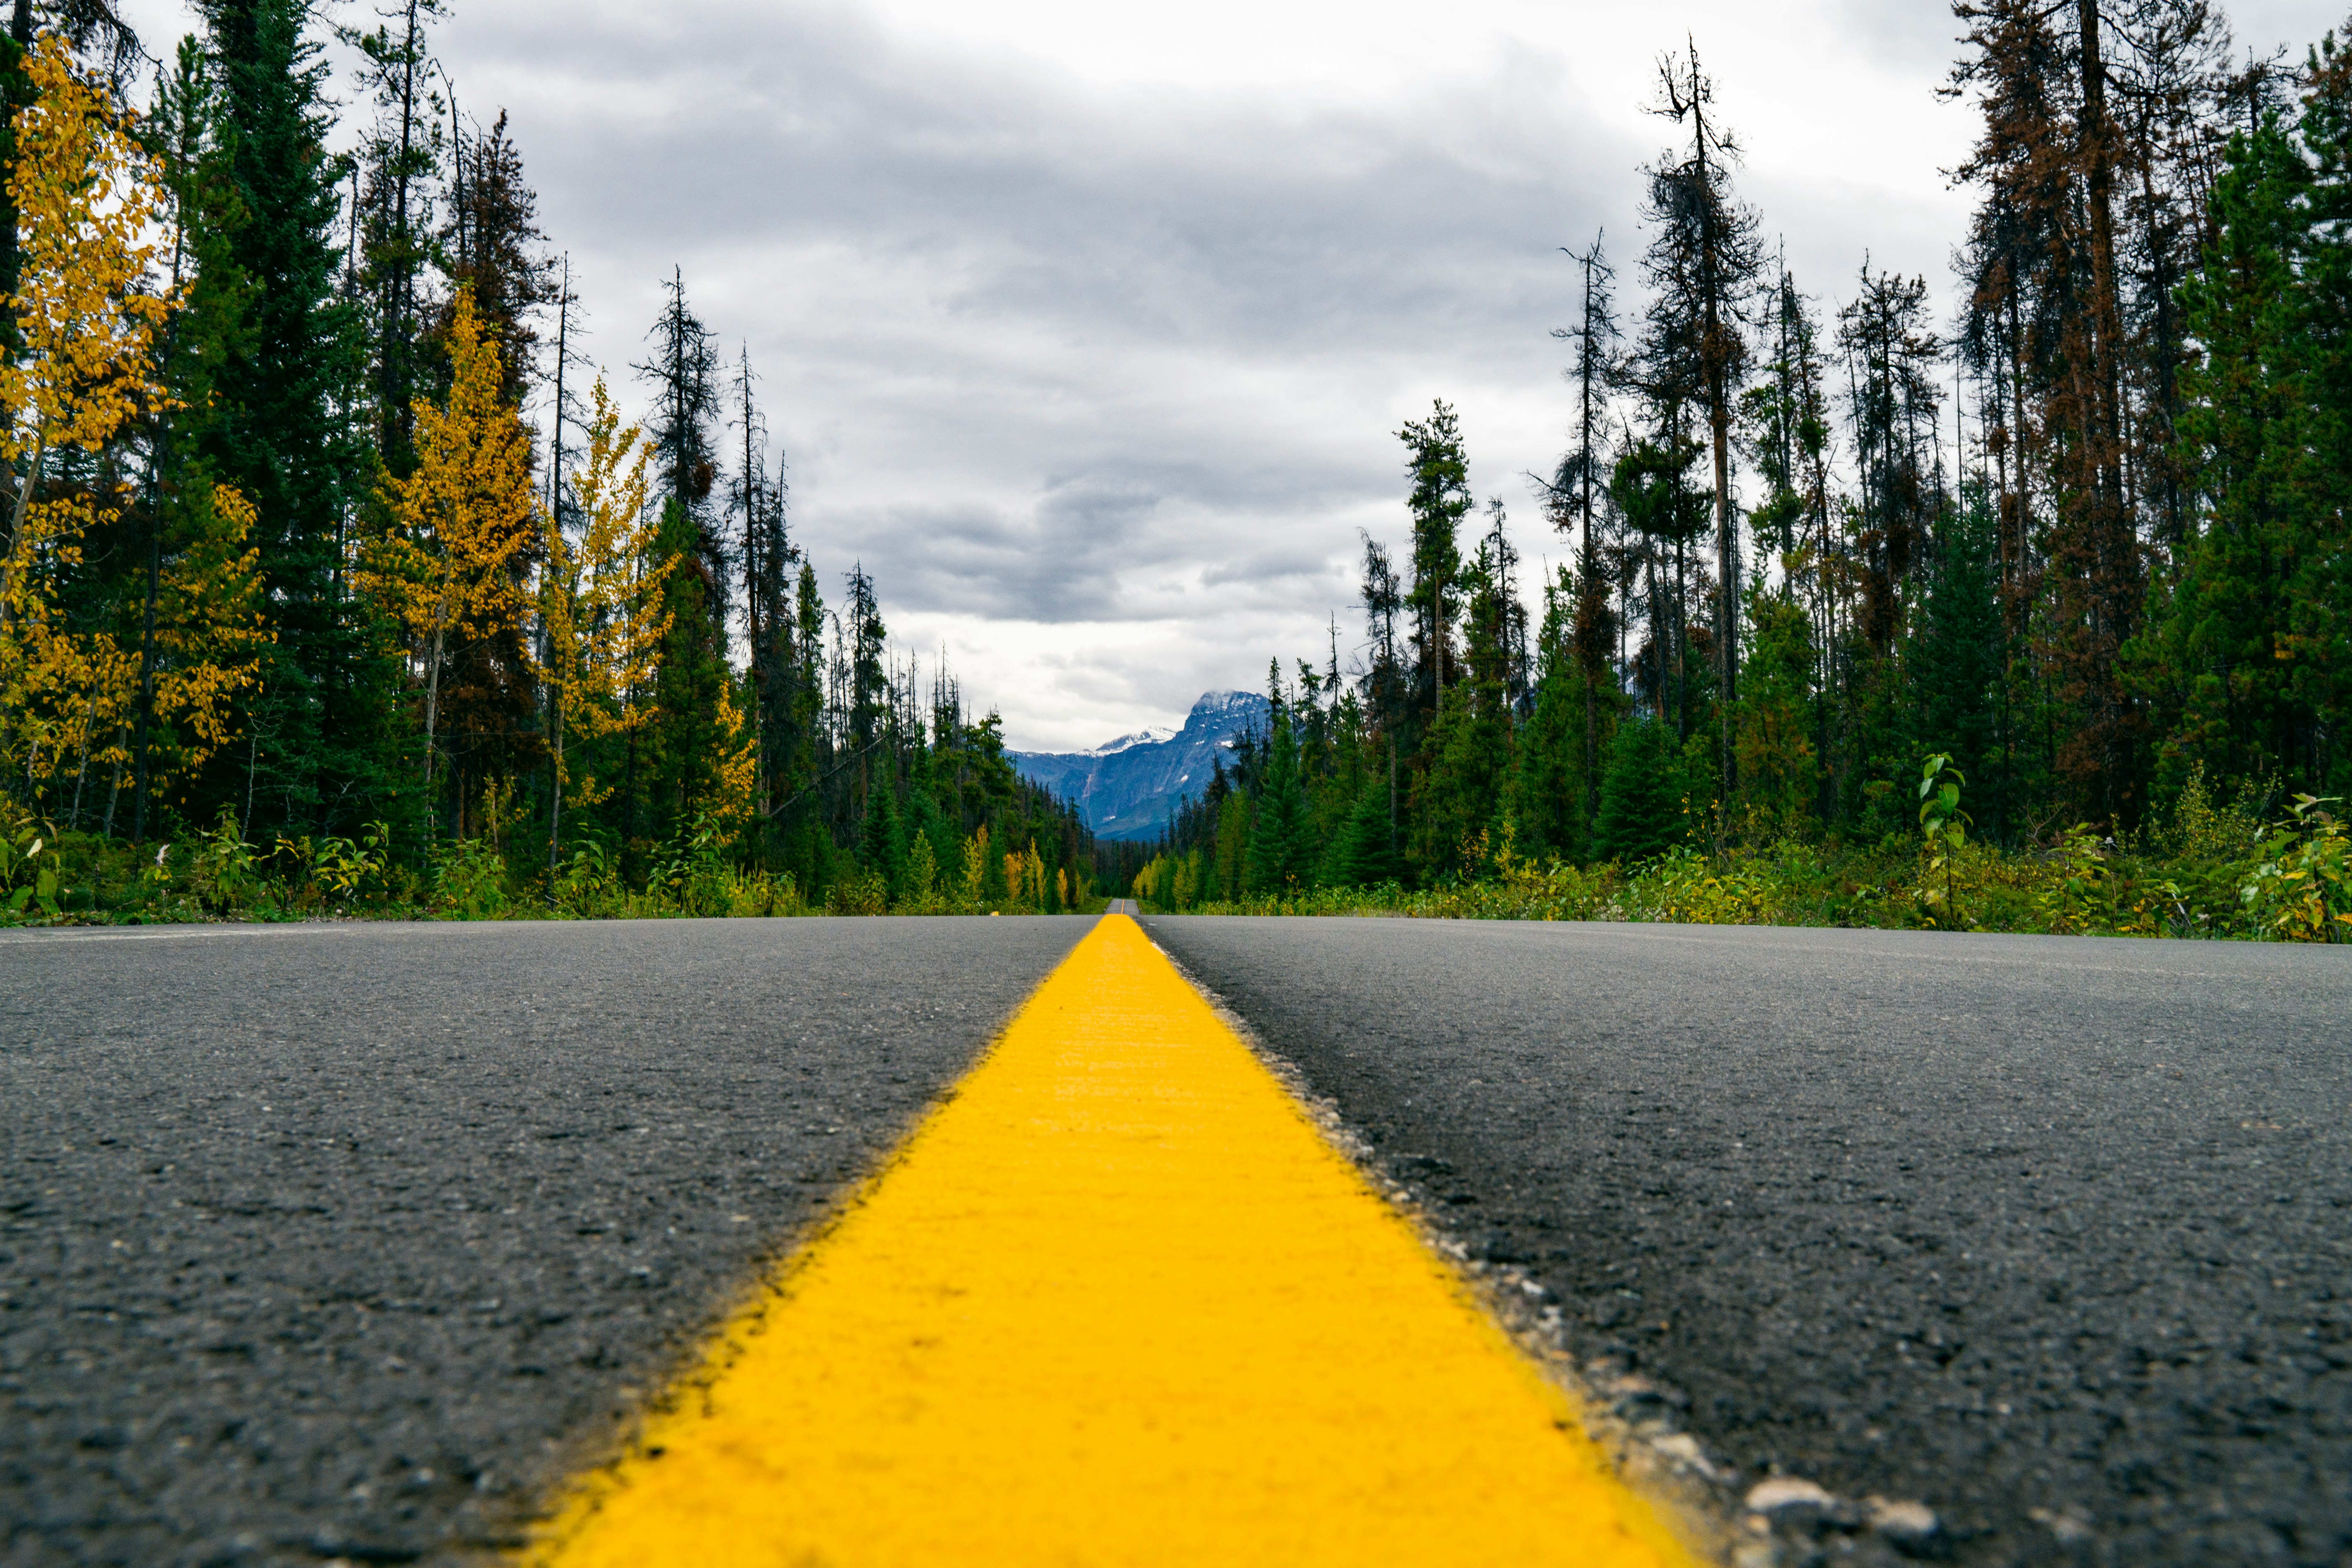 yellow line on gray asphalt road between green trees under gray cloudy sky during daytime